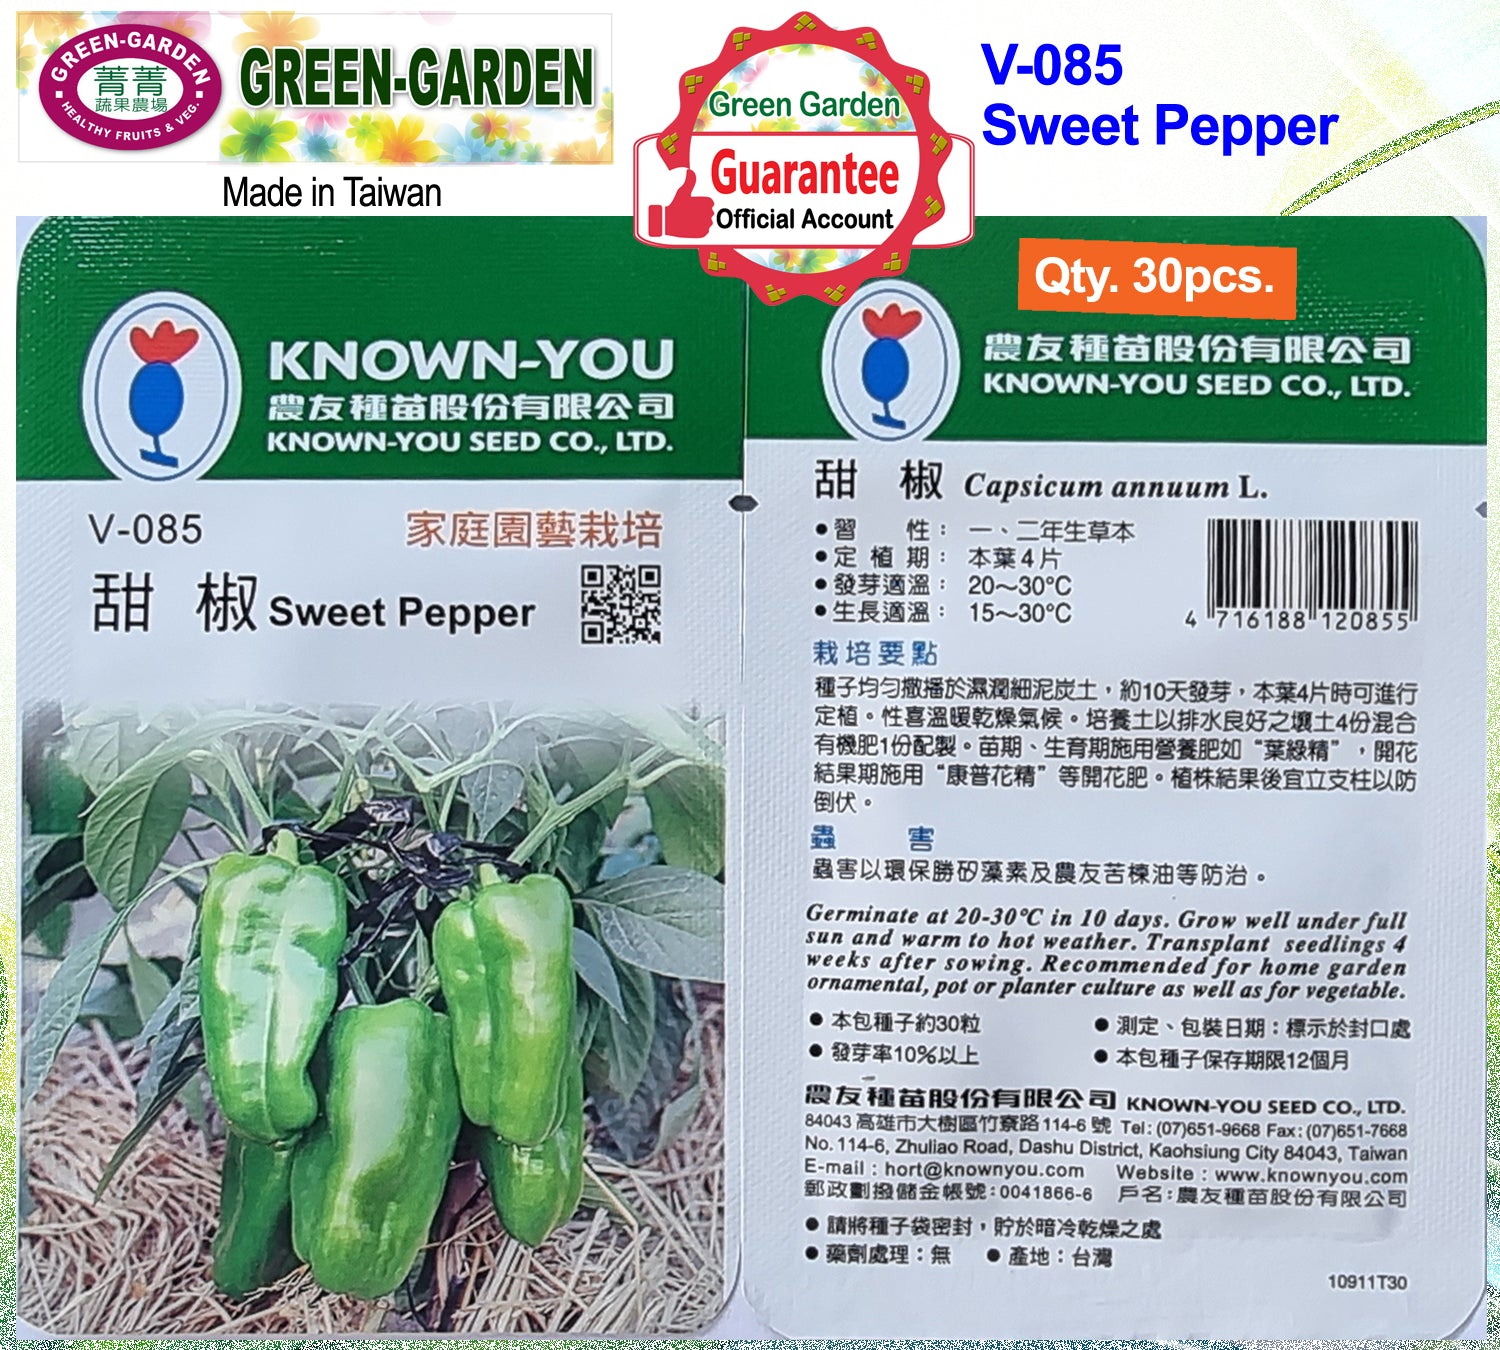 Known You Vegetable Seeds (V-085 Sweet Pepper)